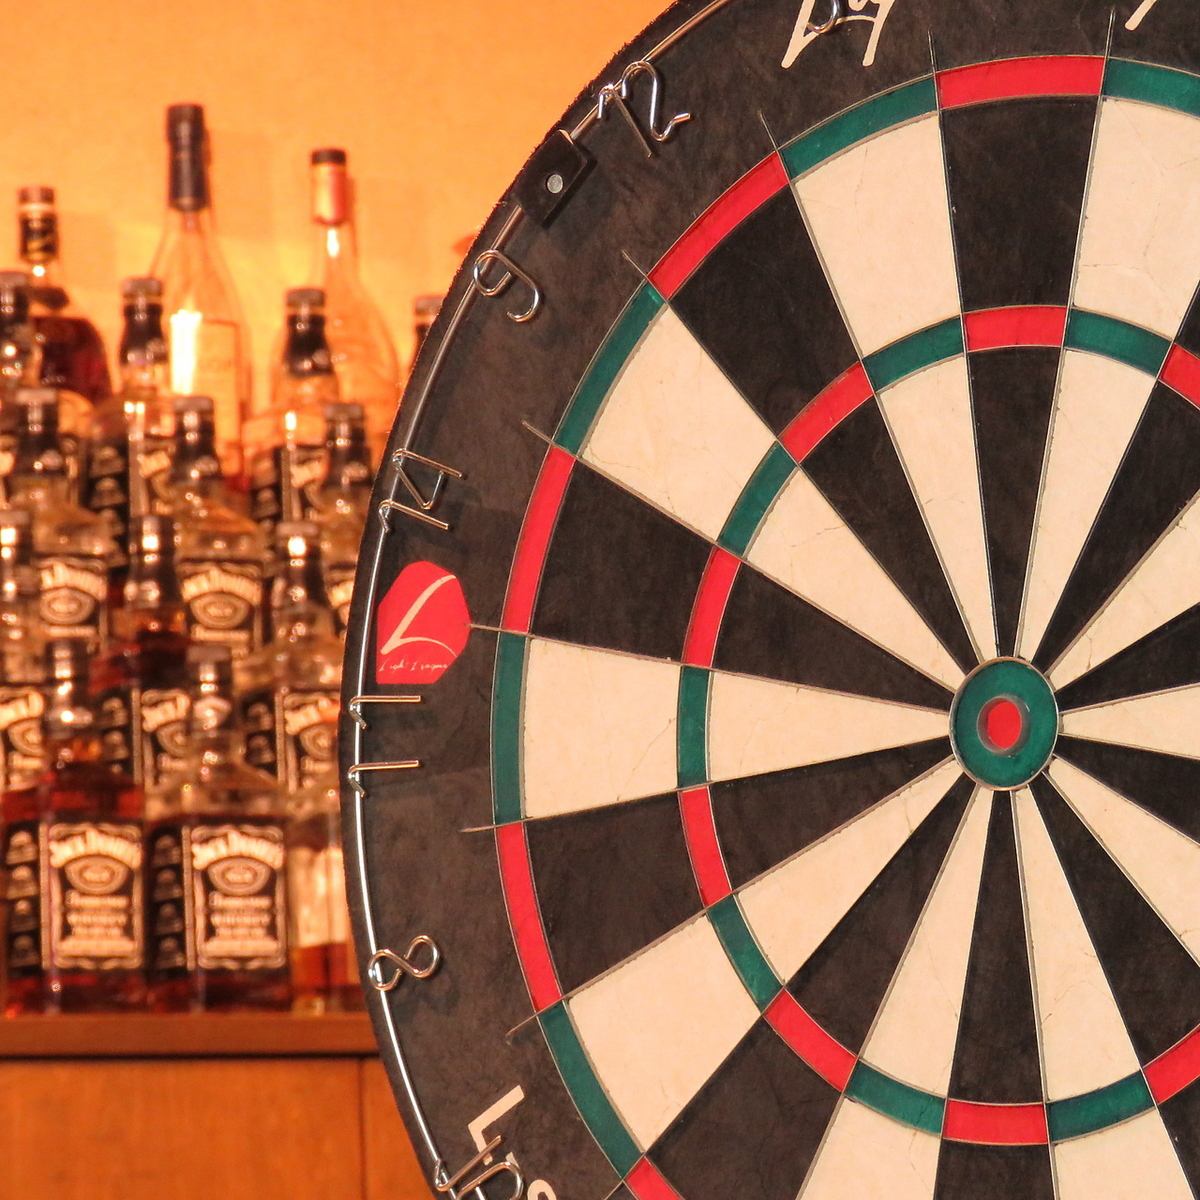 All-you-can-throw darts plan 2,800 yen! Party space that can accommodate up to 50 people!